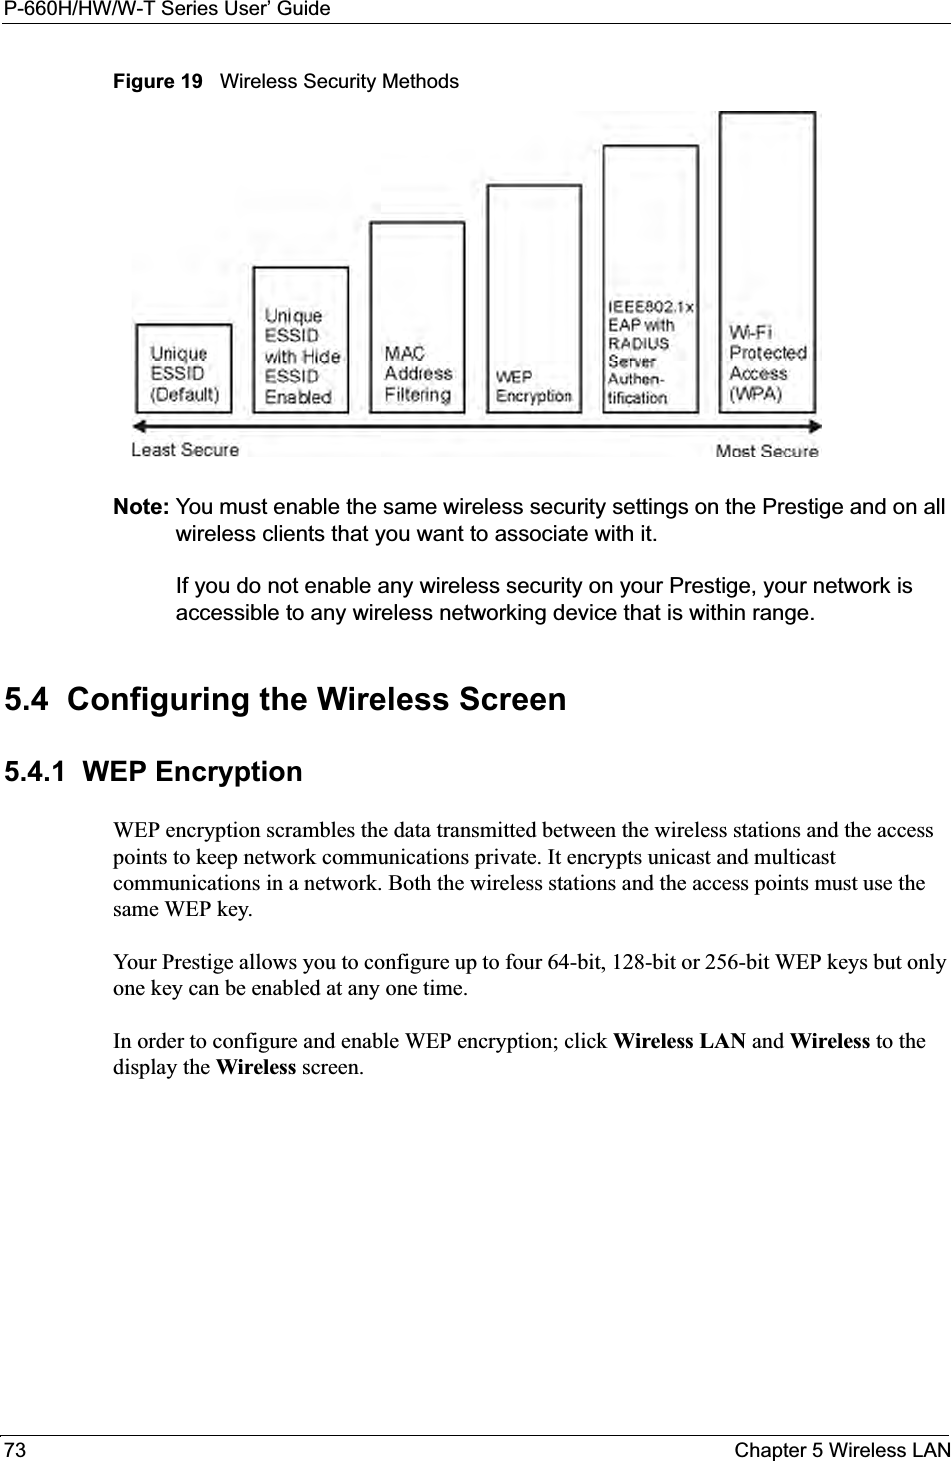 P-660H/HW/W-T Series User’ Guide73 Chapter 5 Wireless LANFigure 19   Wireless Security MethodsNote: You must enable the same wireless security settings on the Prestige and on all wireless clients that you want to associate with it. If you do not enable any wireless security on your Prestige, your network is accessible to any wireless networking device that is within range. 5.4  Configuring the Wireless Screen 5.4.1  WEP EncryptionWEP encryption scrambles the data transmitted between the wireless stations and the access points to keep network communications private. It encrypts unicast and multicast communications in a network. Both the wireless stations and the access points must use the same WEP key. Your Prestige allows you to configure up to four 64-bit, 128-bit or 256-bit WEP keys but only one key can be enabled at any one time. In order to configure and enable WEP encryption; click Wireless LAN and Wireless to the display the Wireless screen.